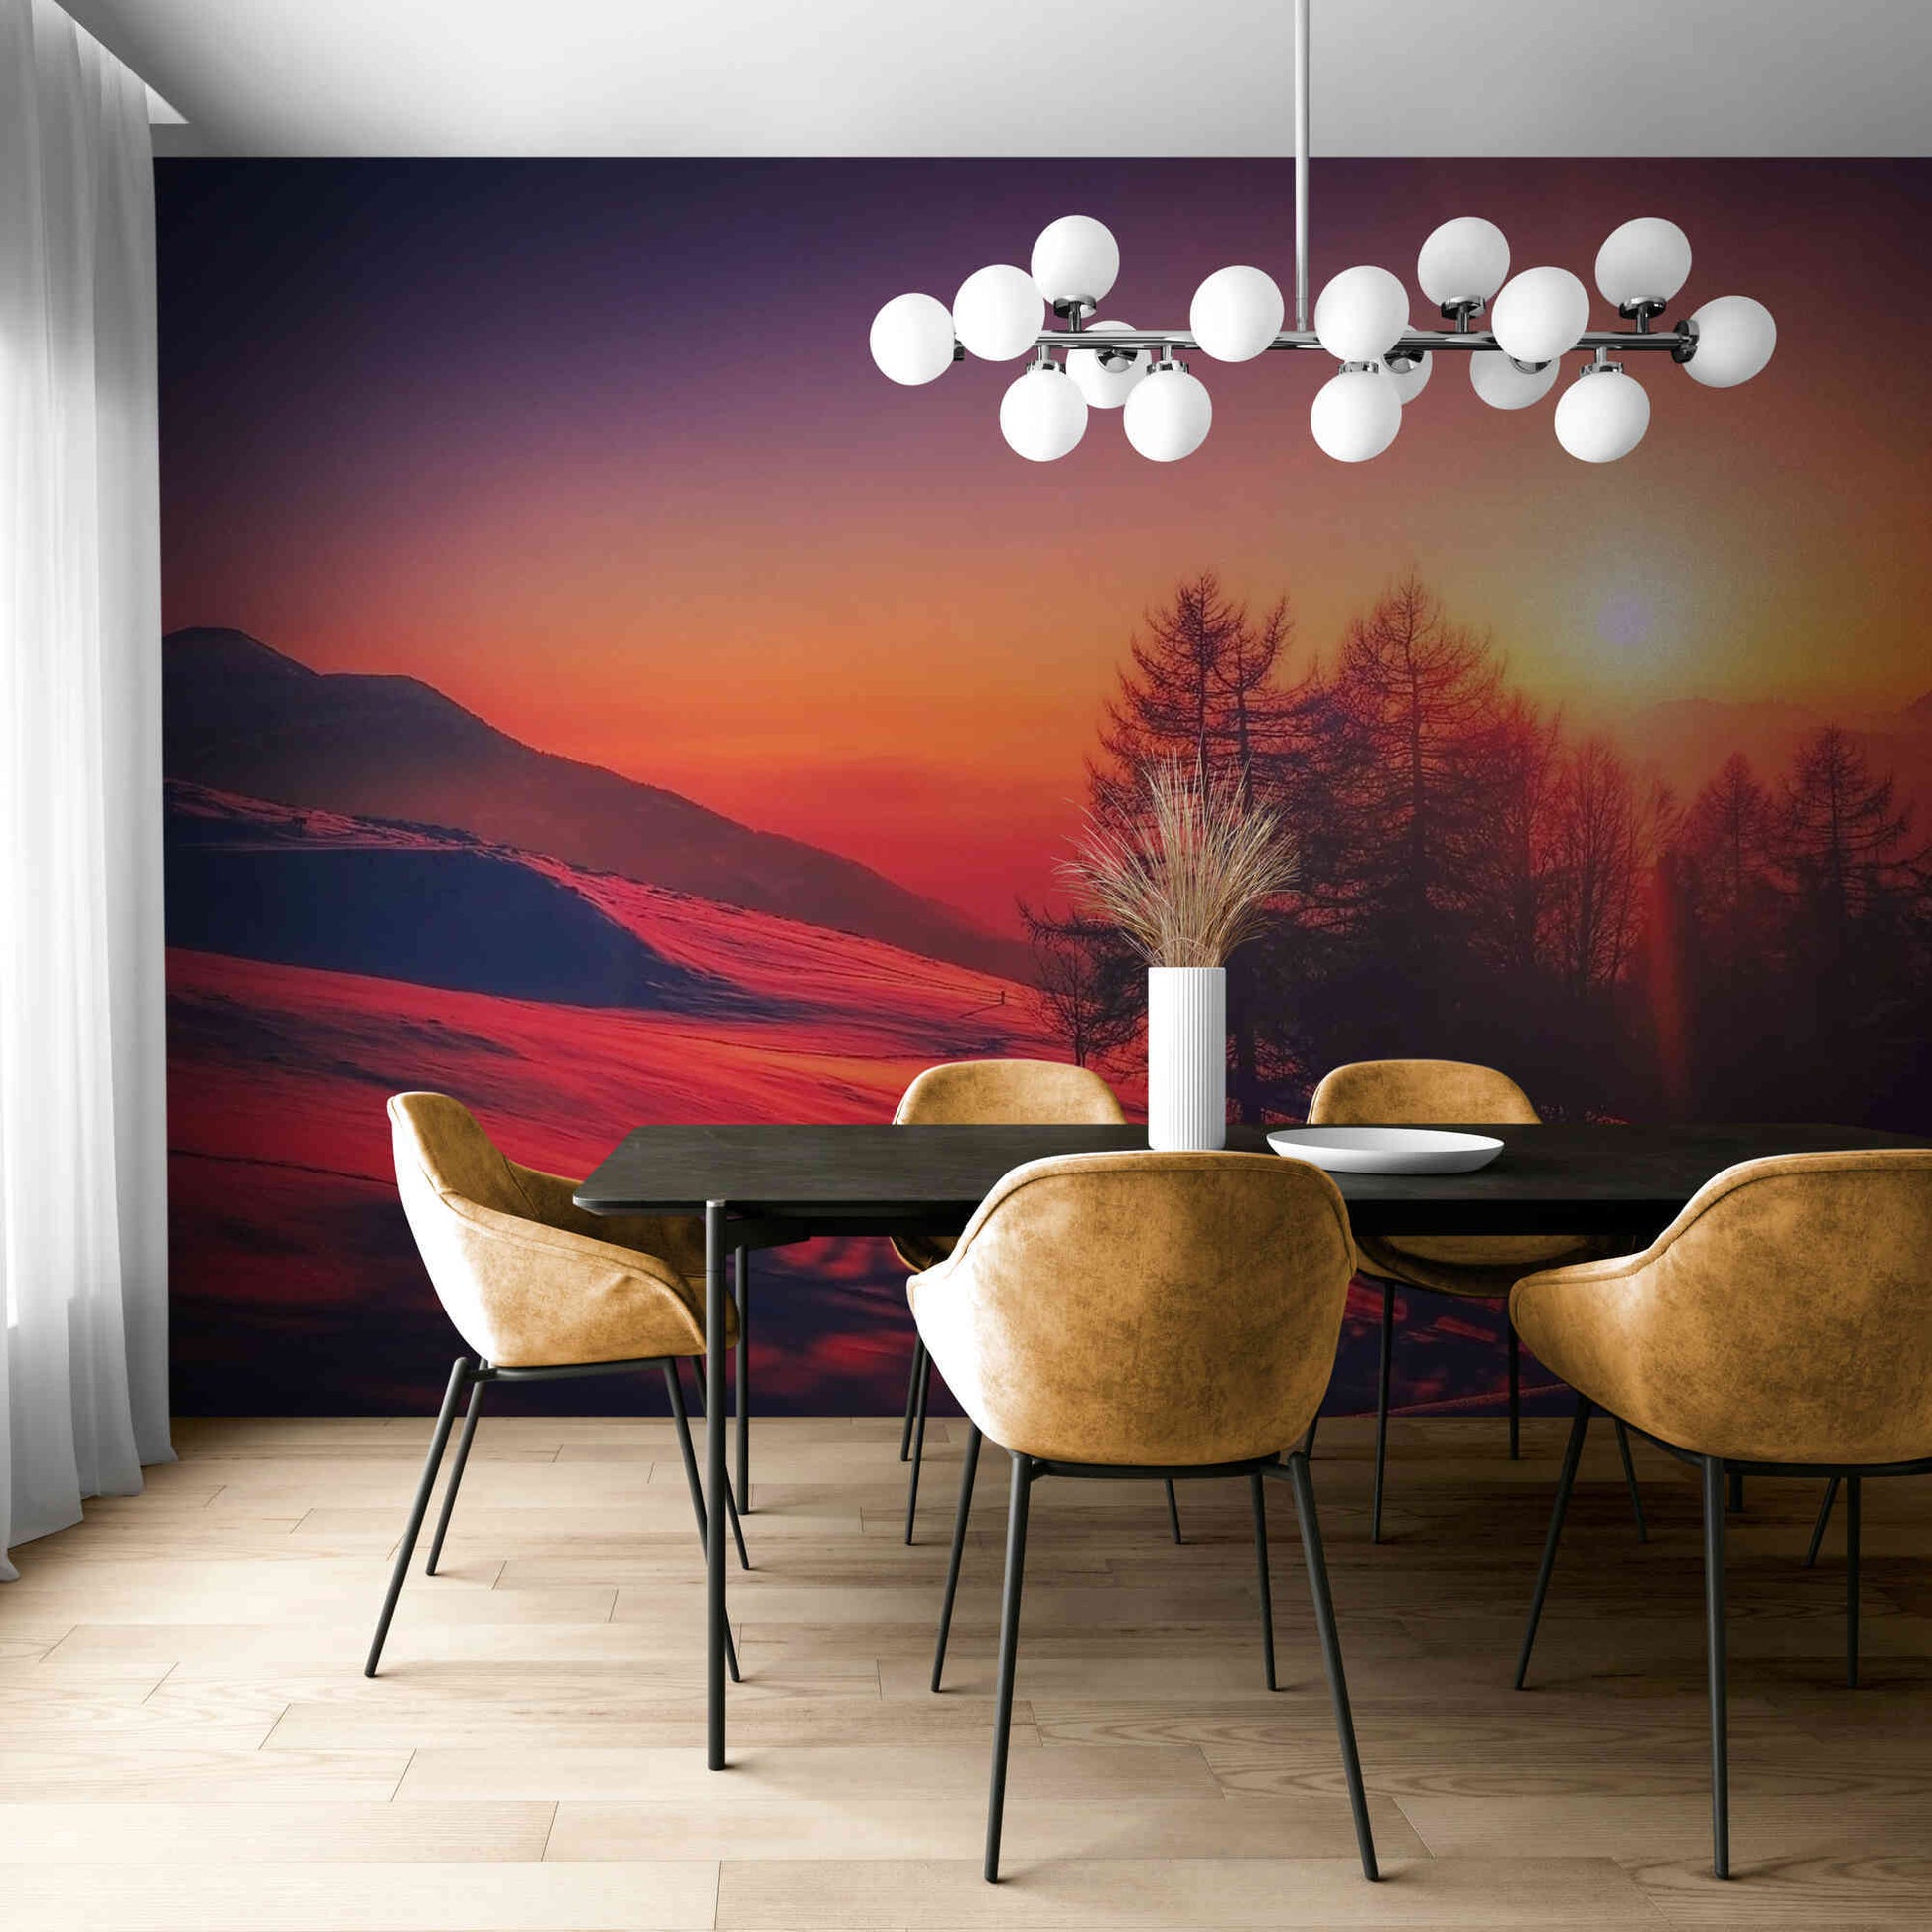 Sunset peak serenity in our Peel and Stick Wallpaper, offering a tranquil mountain vista for any space.